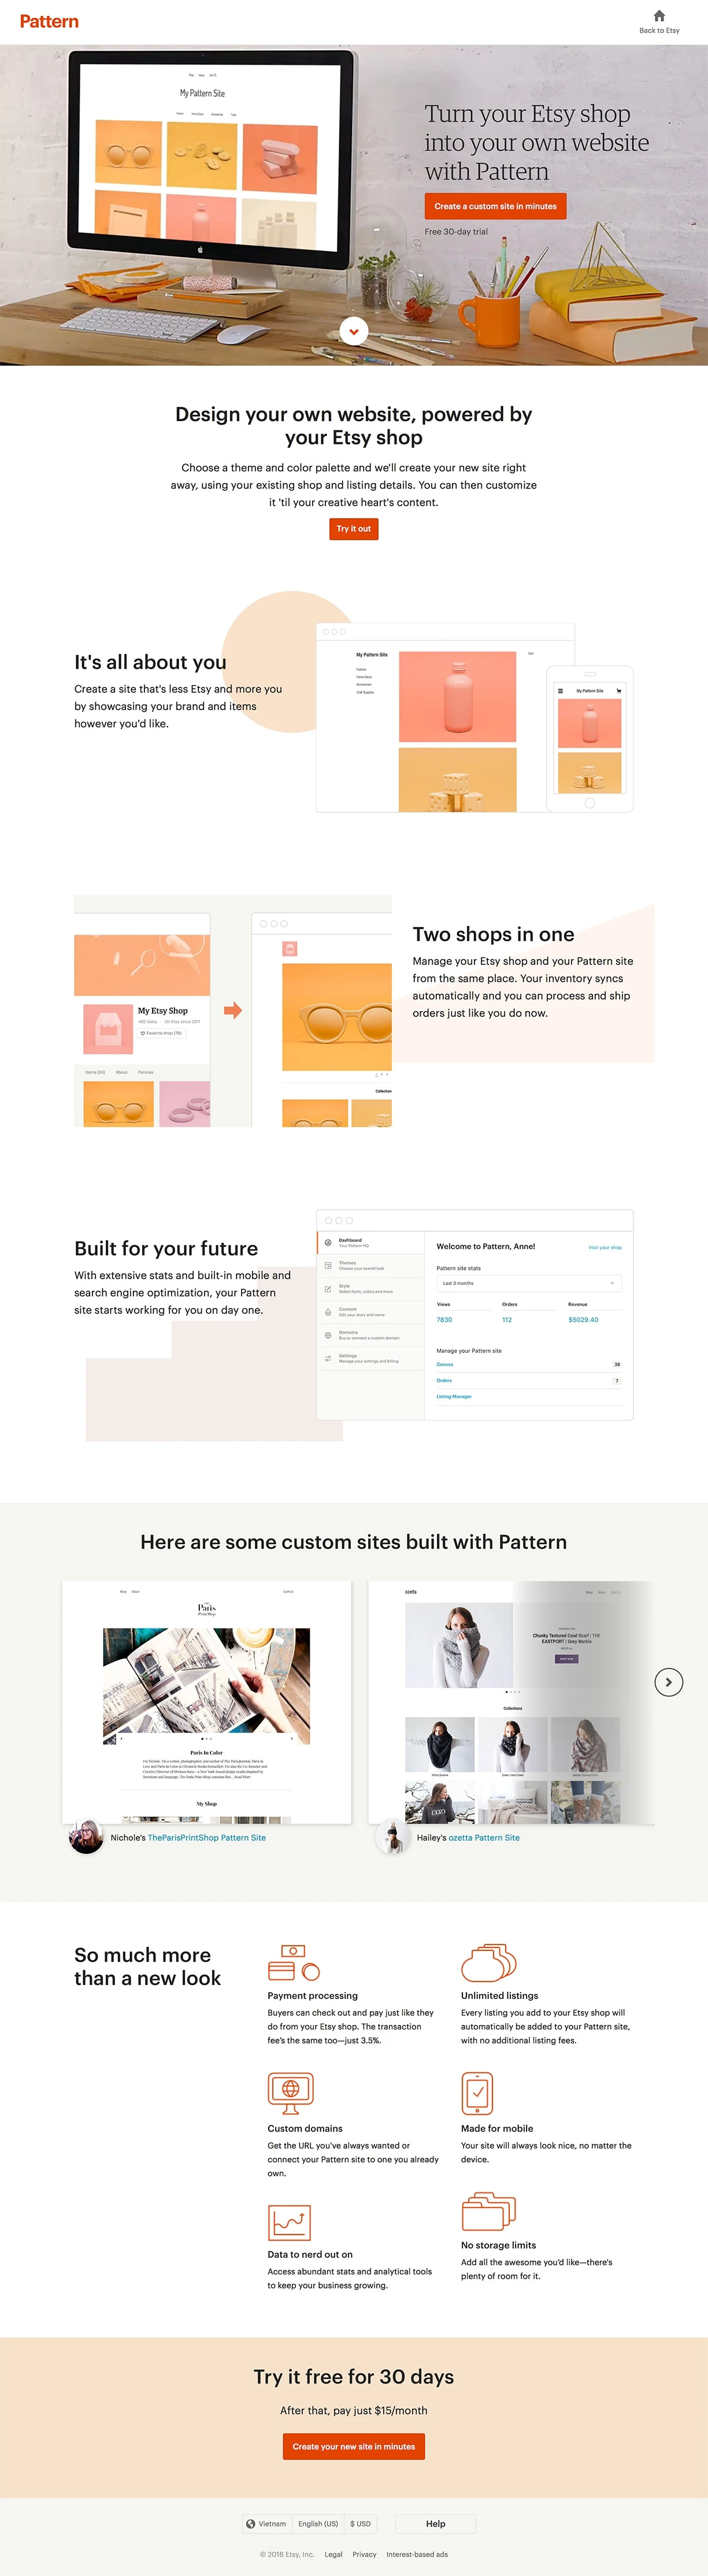 Pattern by Etsy Landing Page Example: Design your own website, powered by your Etsy shop